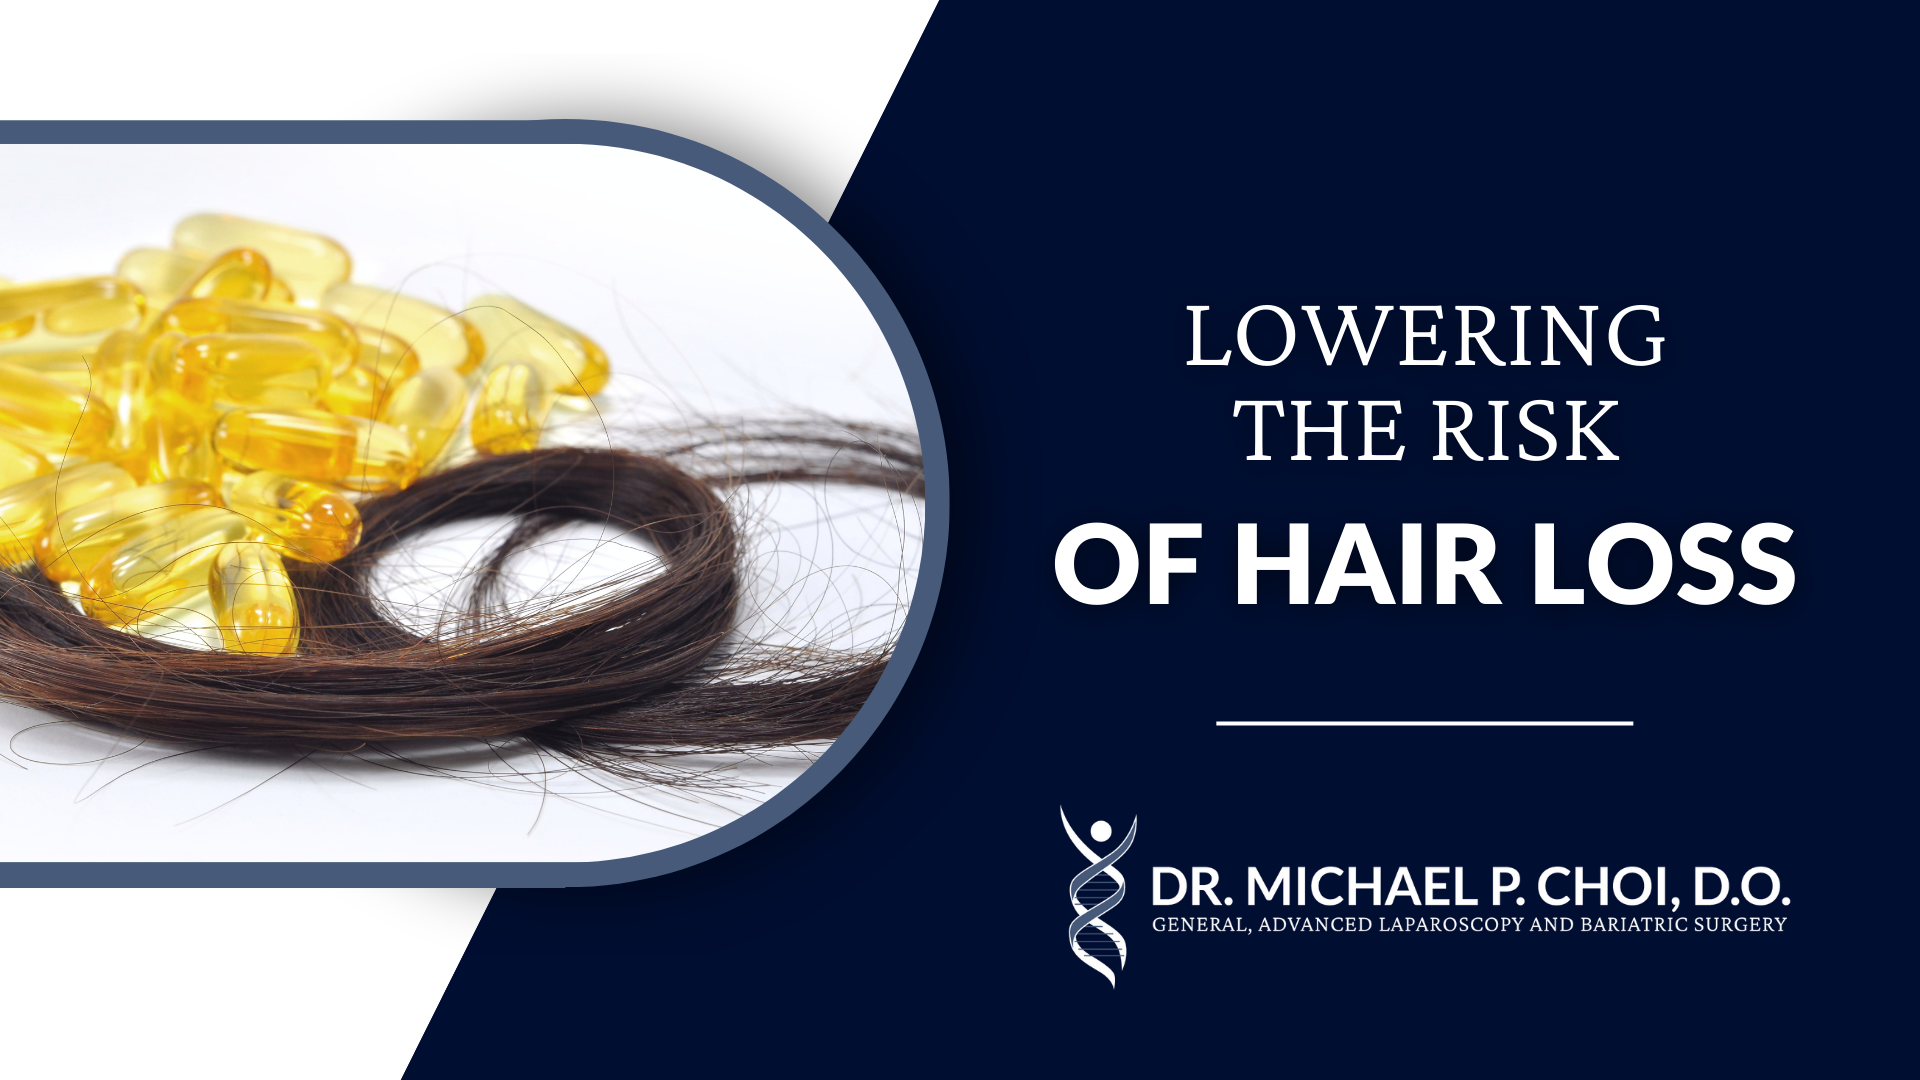 LOWERING THE RISK OF HAIR LOSS